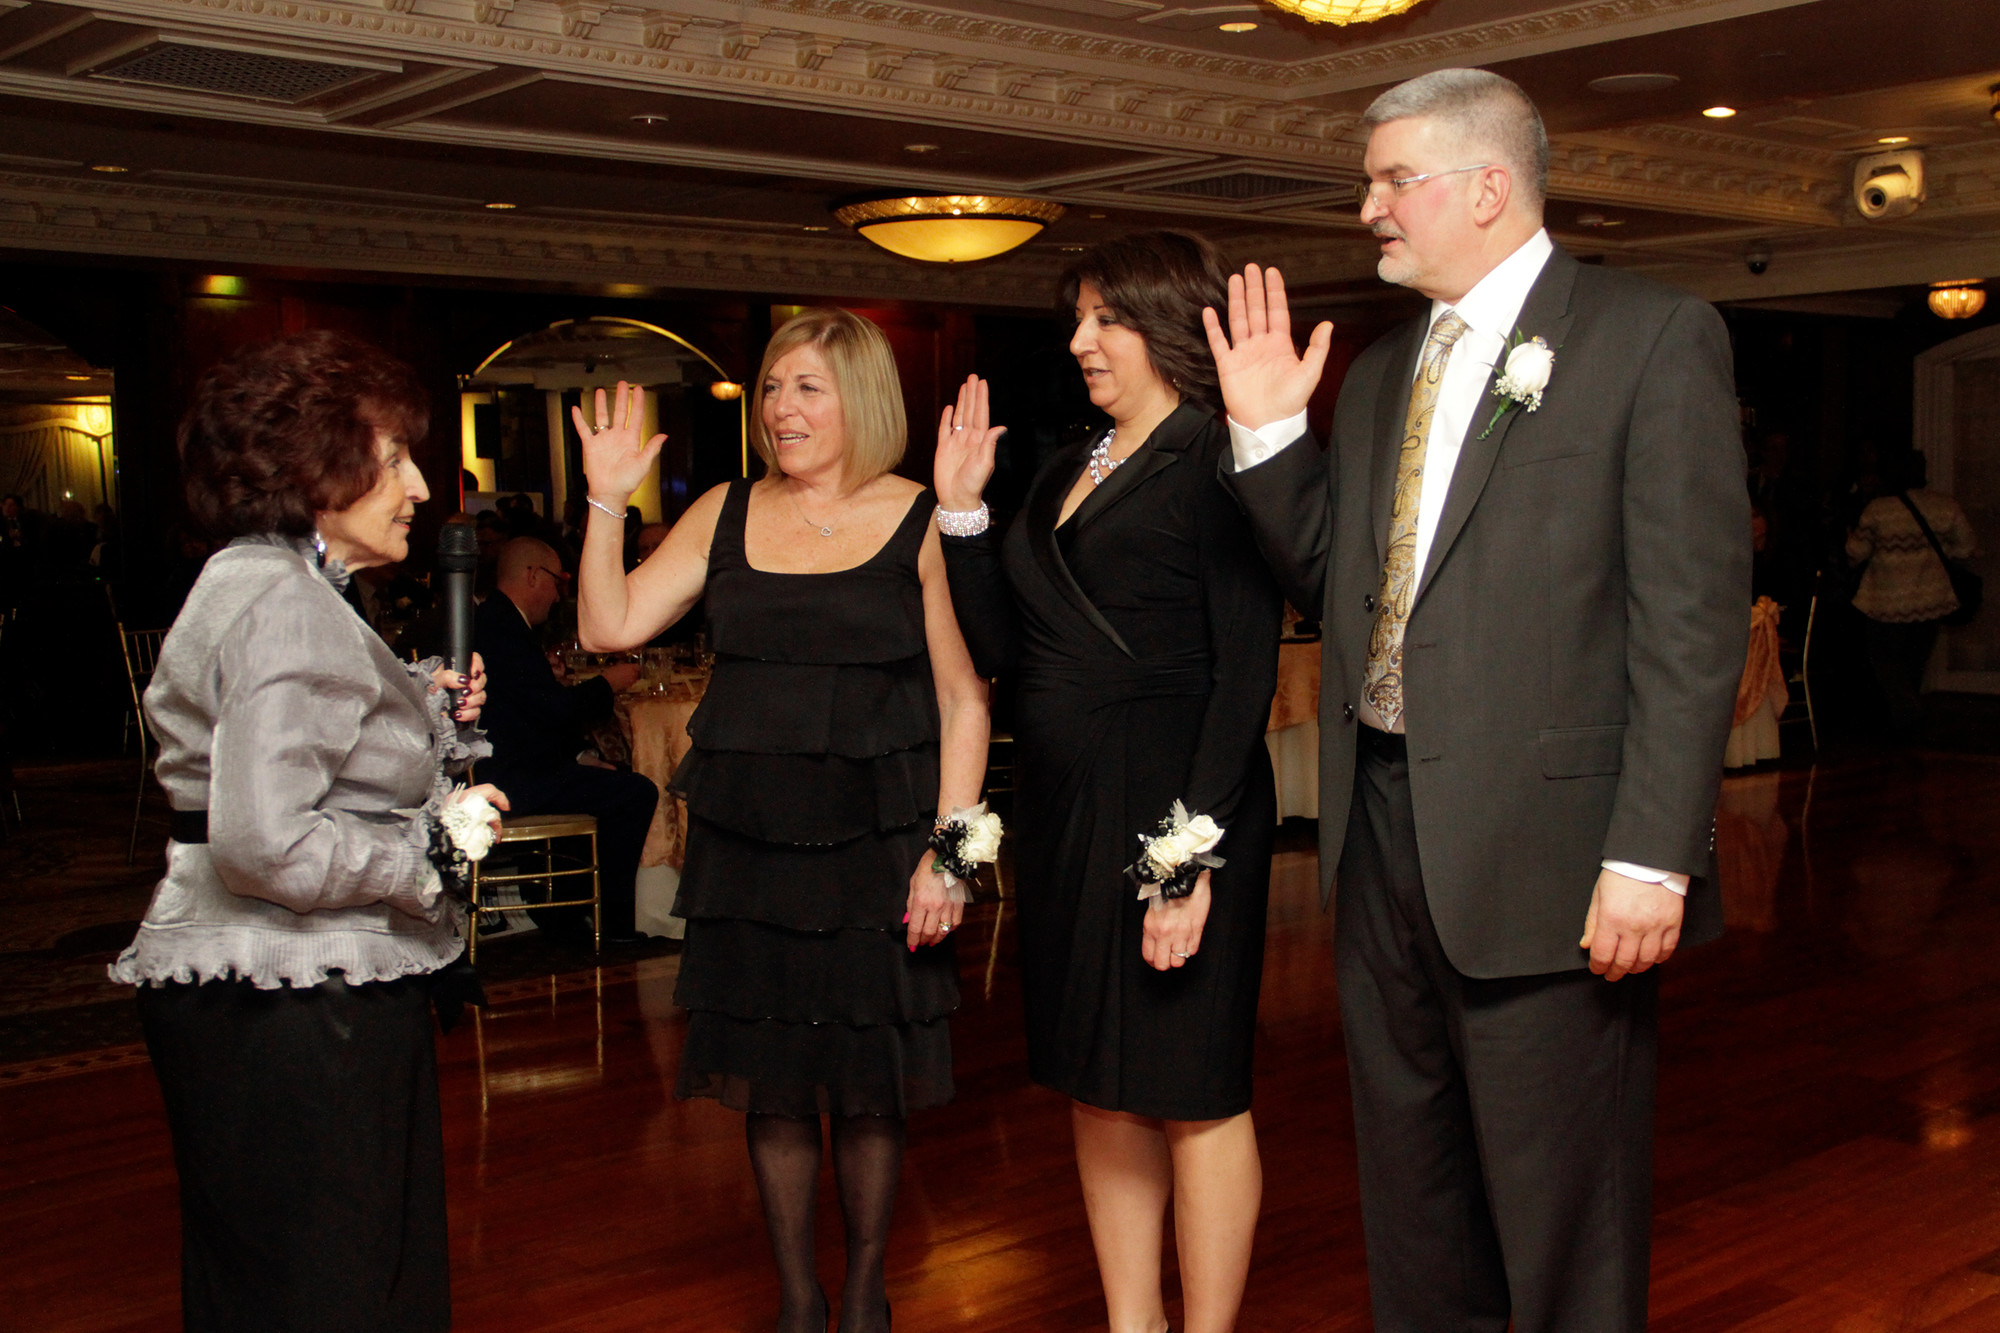 Nassau County Legislator Norma Gonsalves swore in the chamber’s new officers during the ceremony at Westbury Manor.